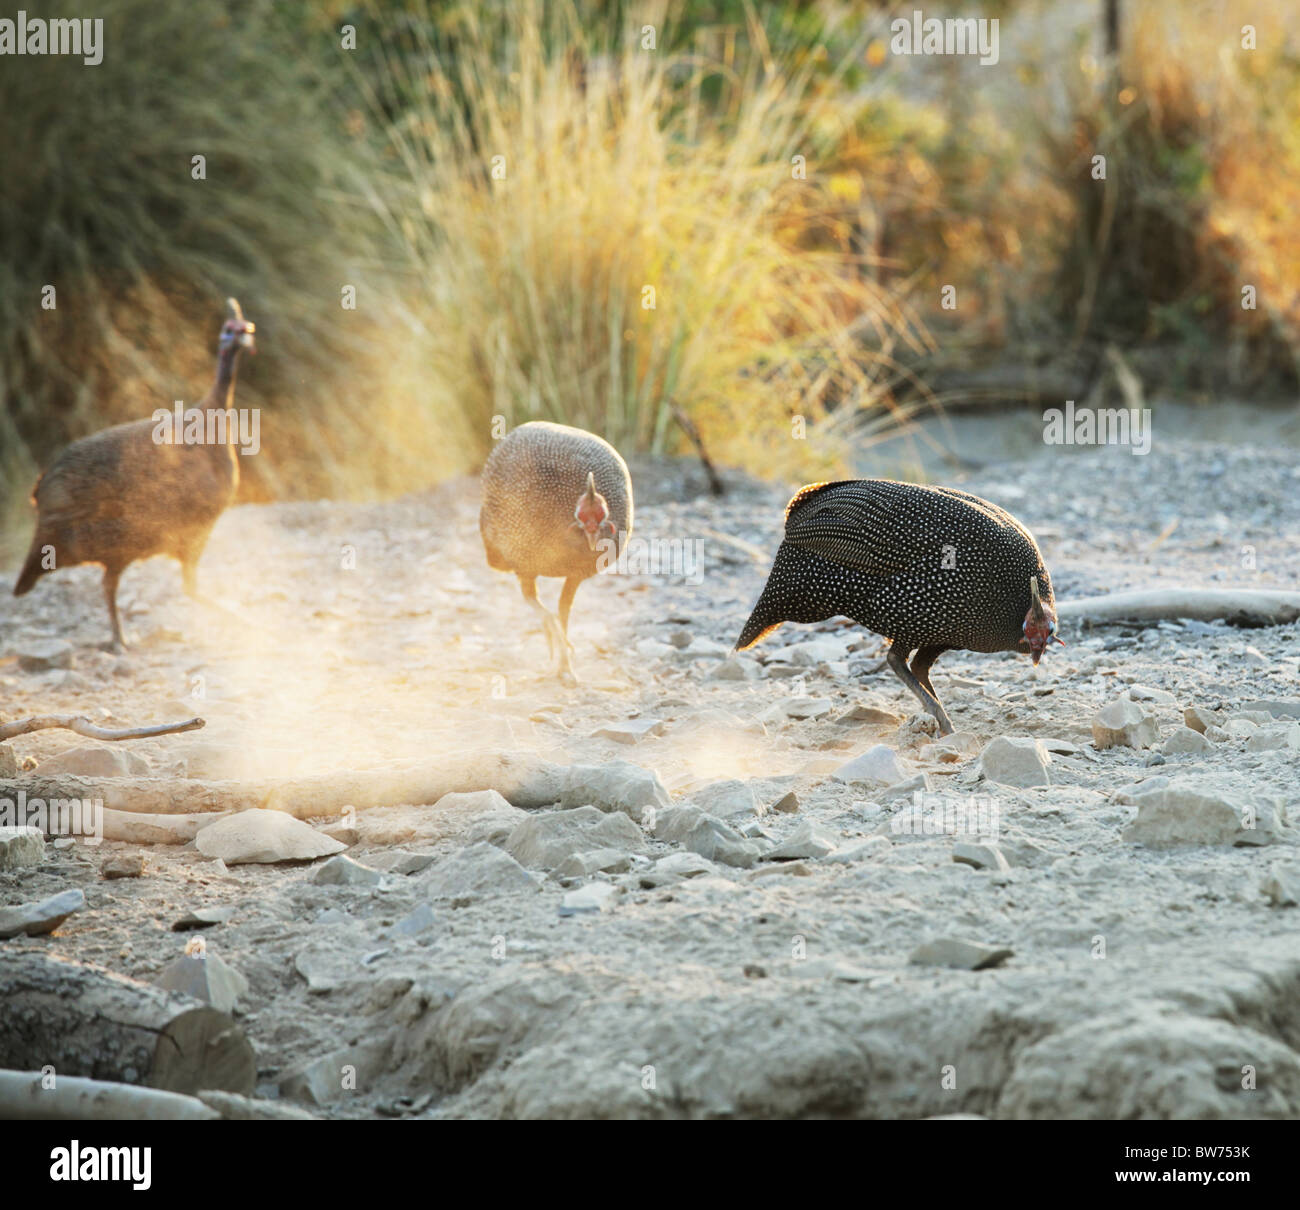 Guinea fowls in Namibia Stock Photo